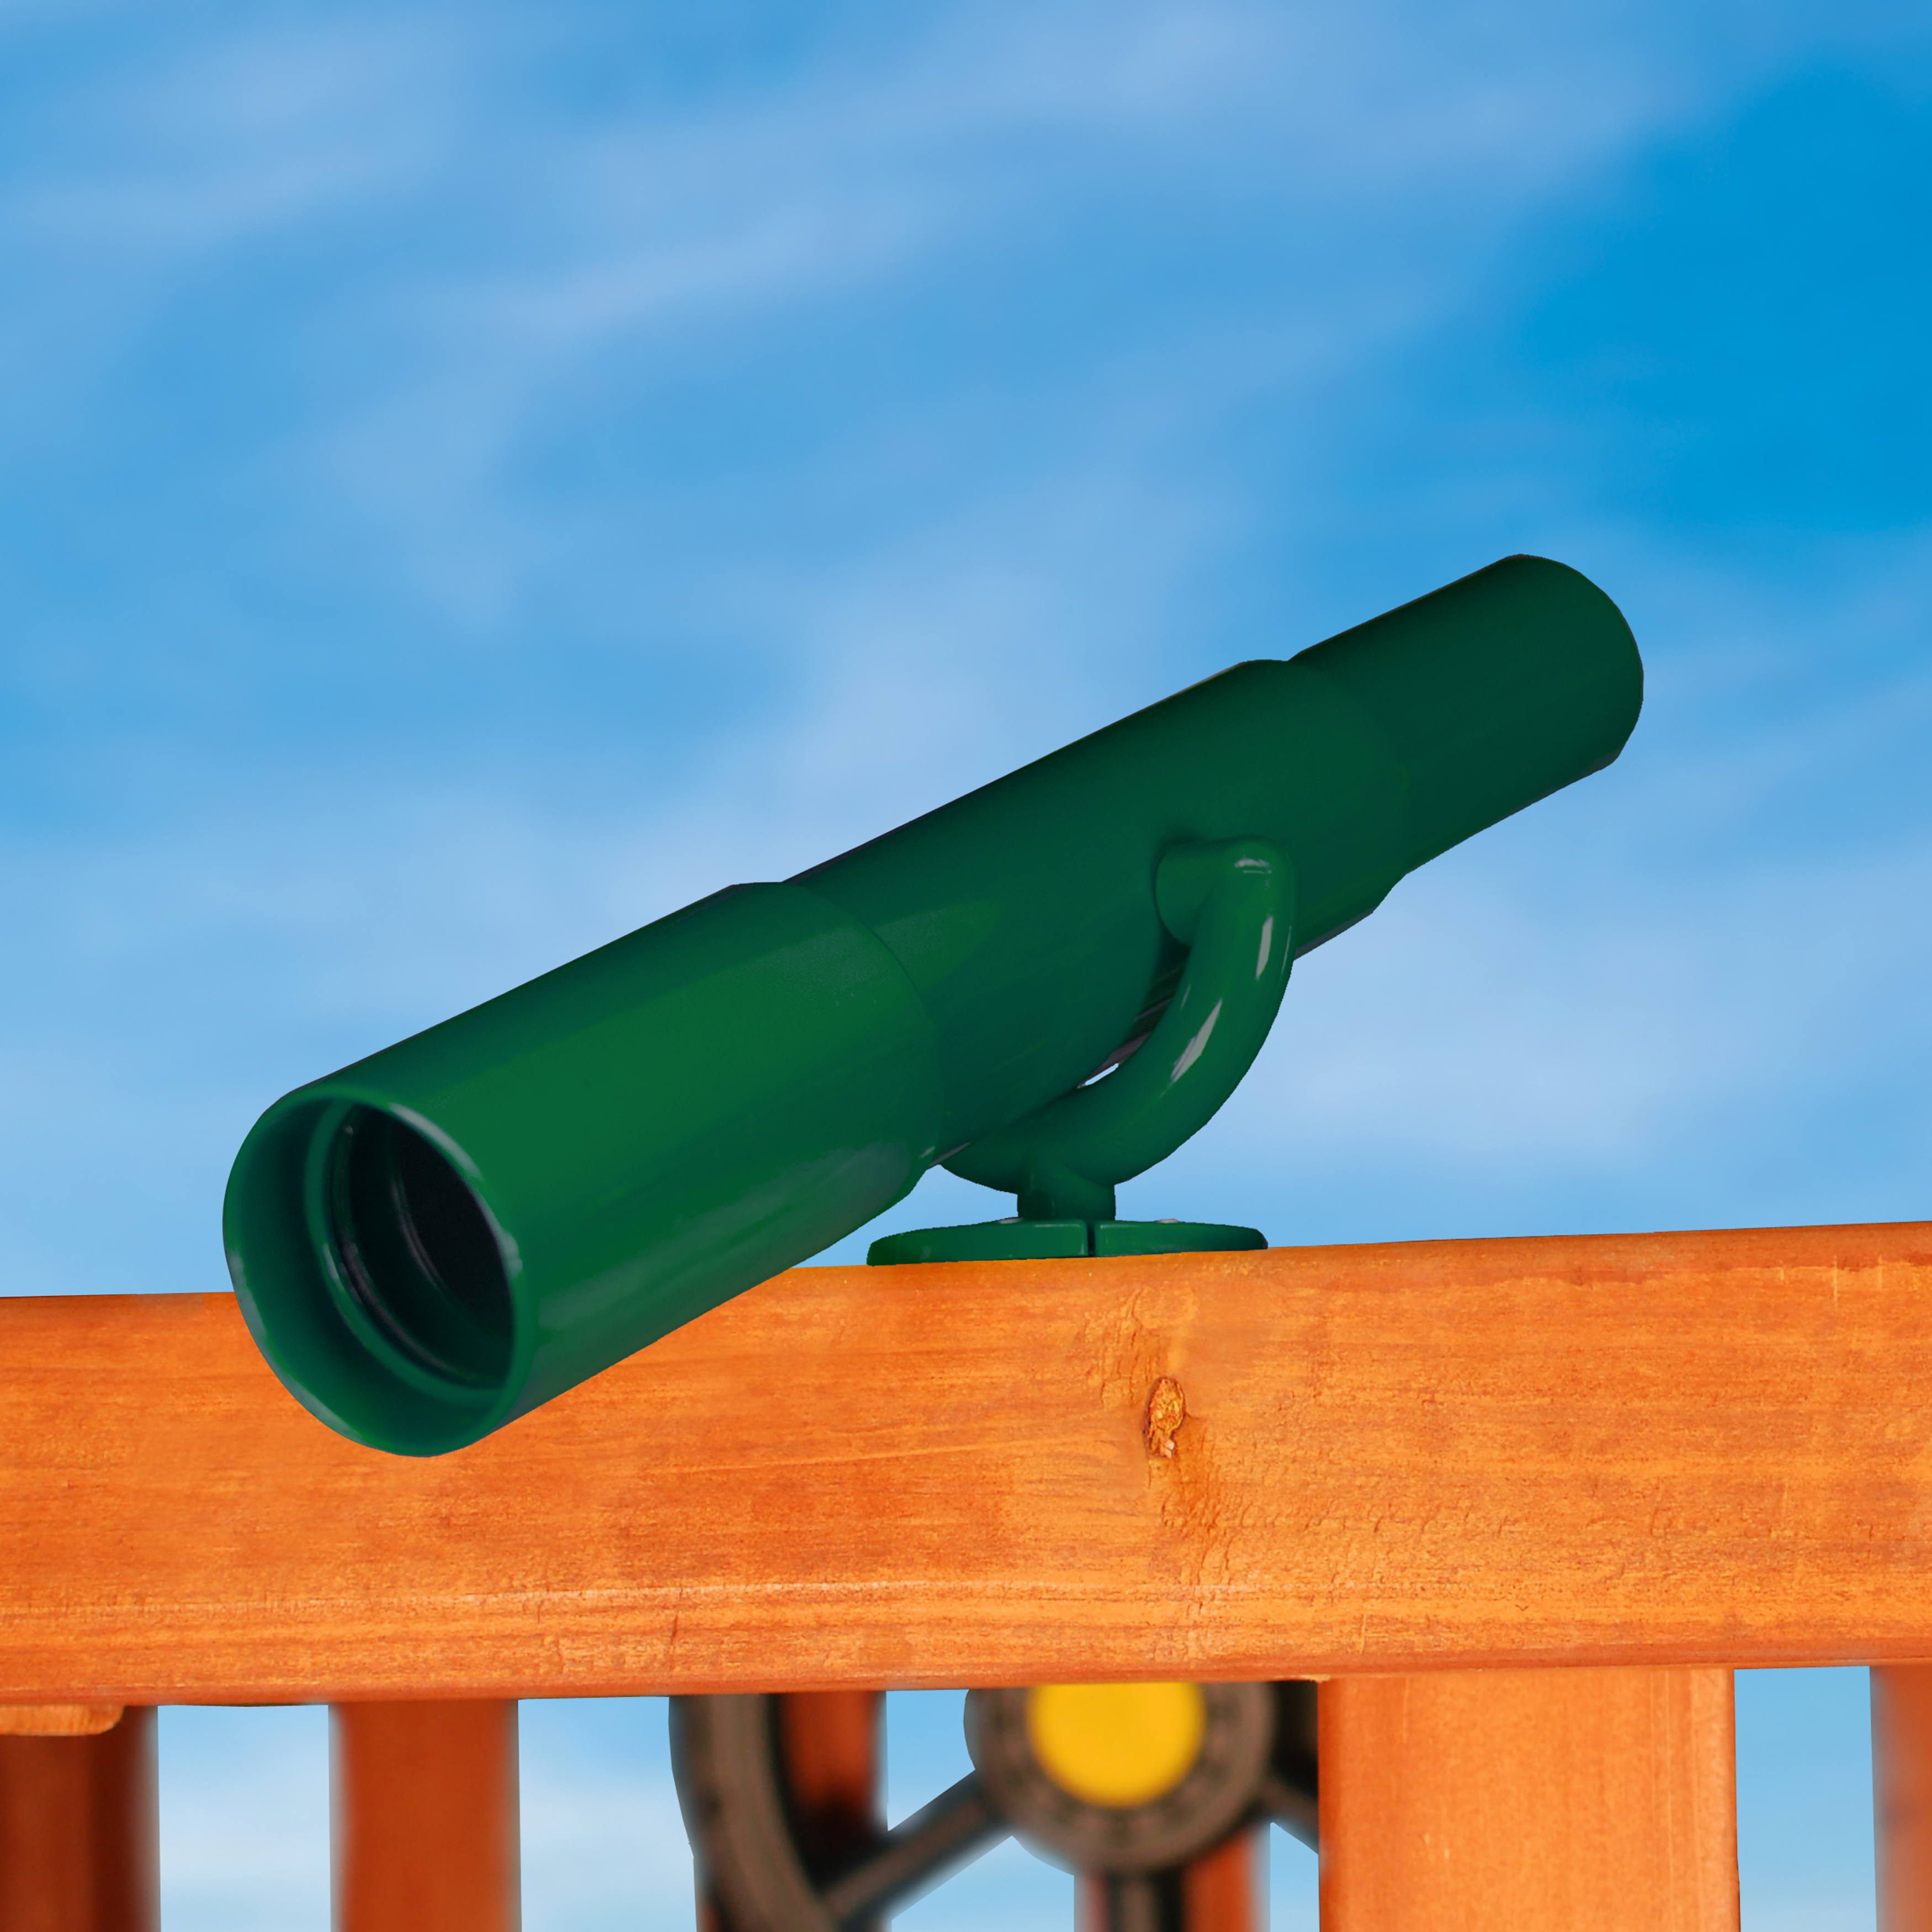 Gorilla Playsets Non-Magnifying Play Telescope with Mounting Hardware – Green - image 2 of 2